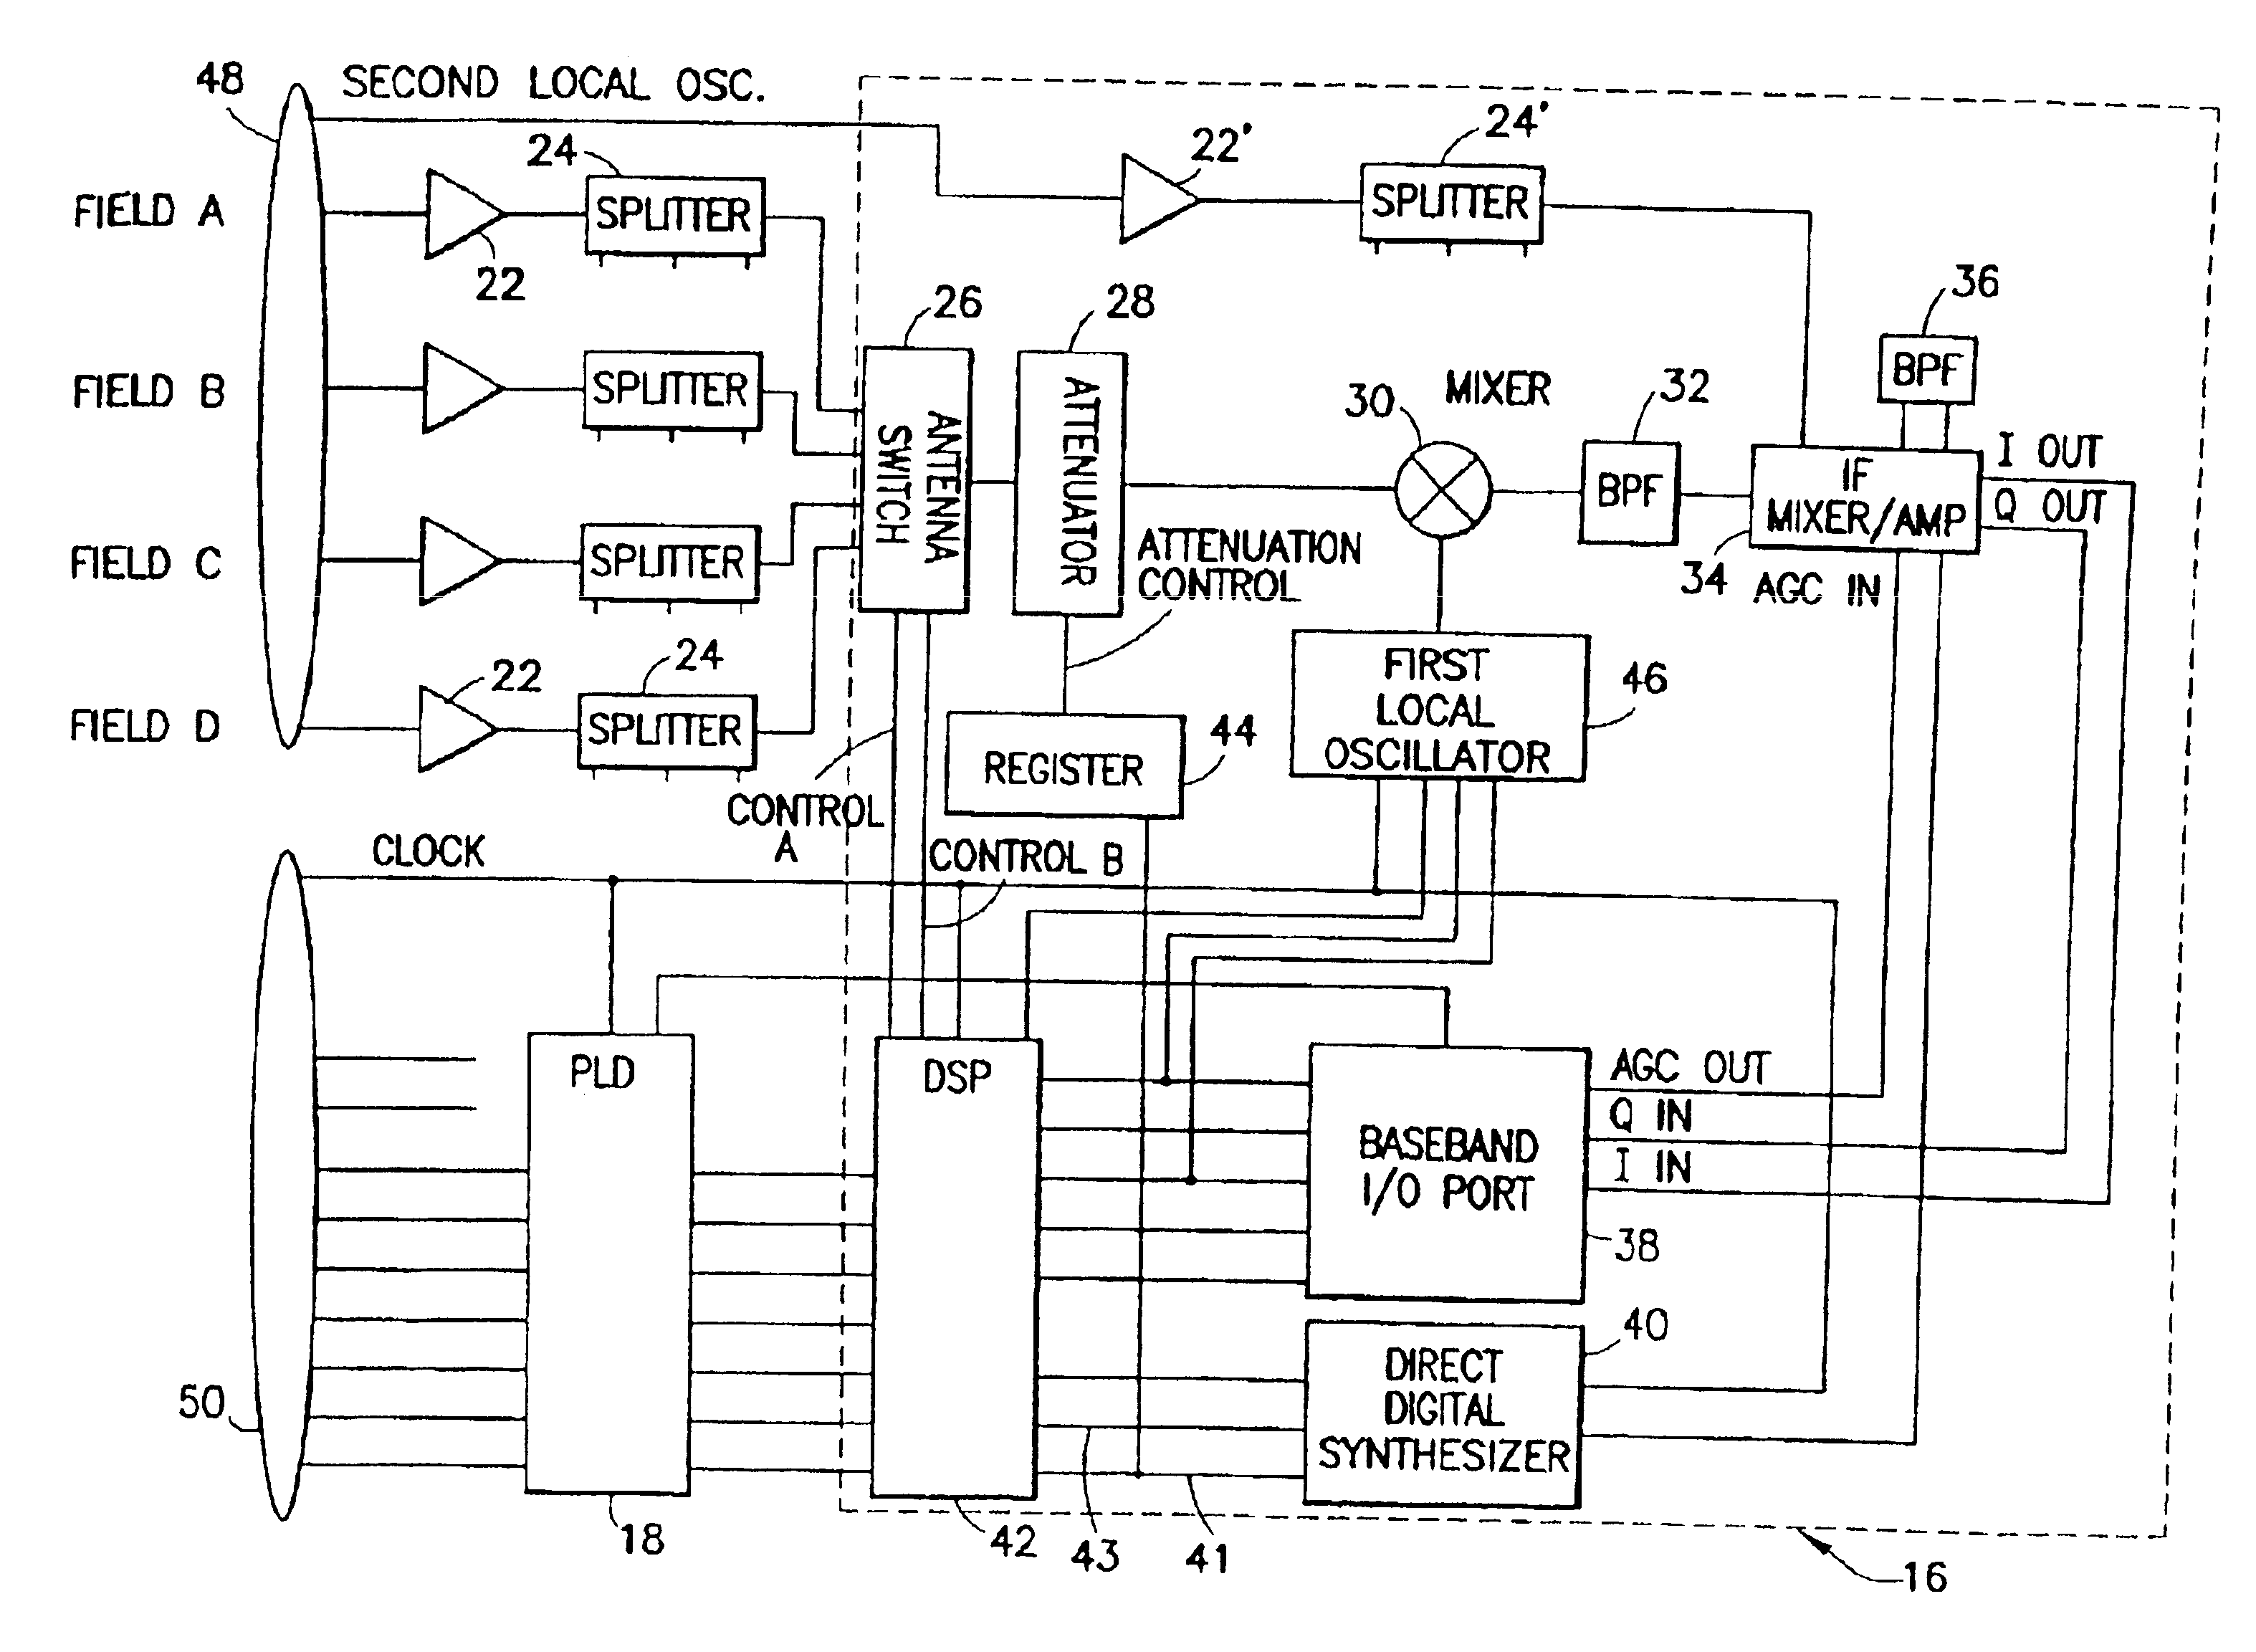 Pro-active antenna switching based on relative power